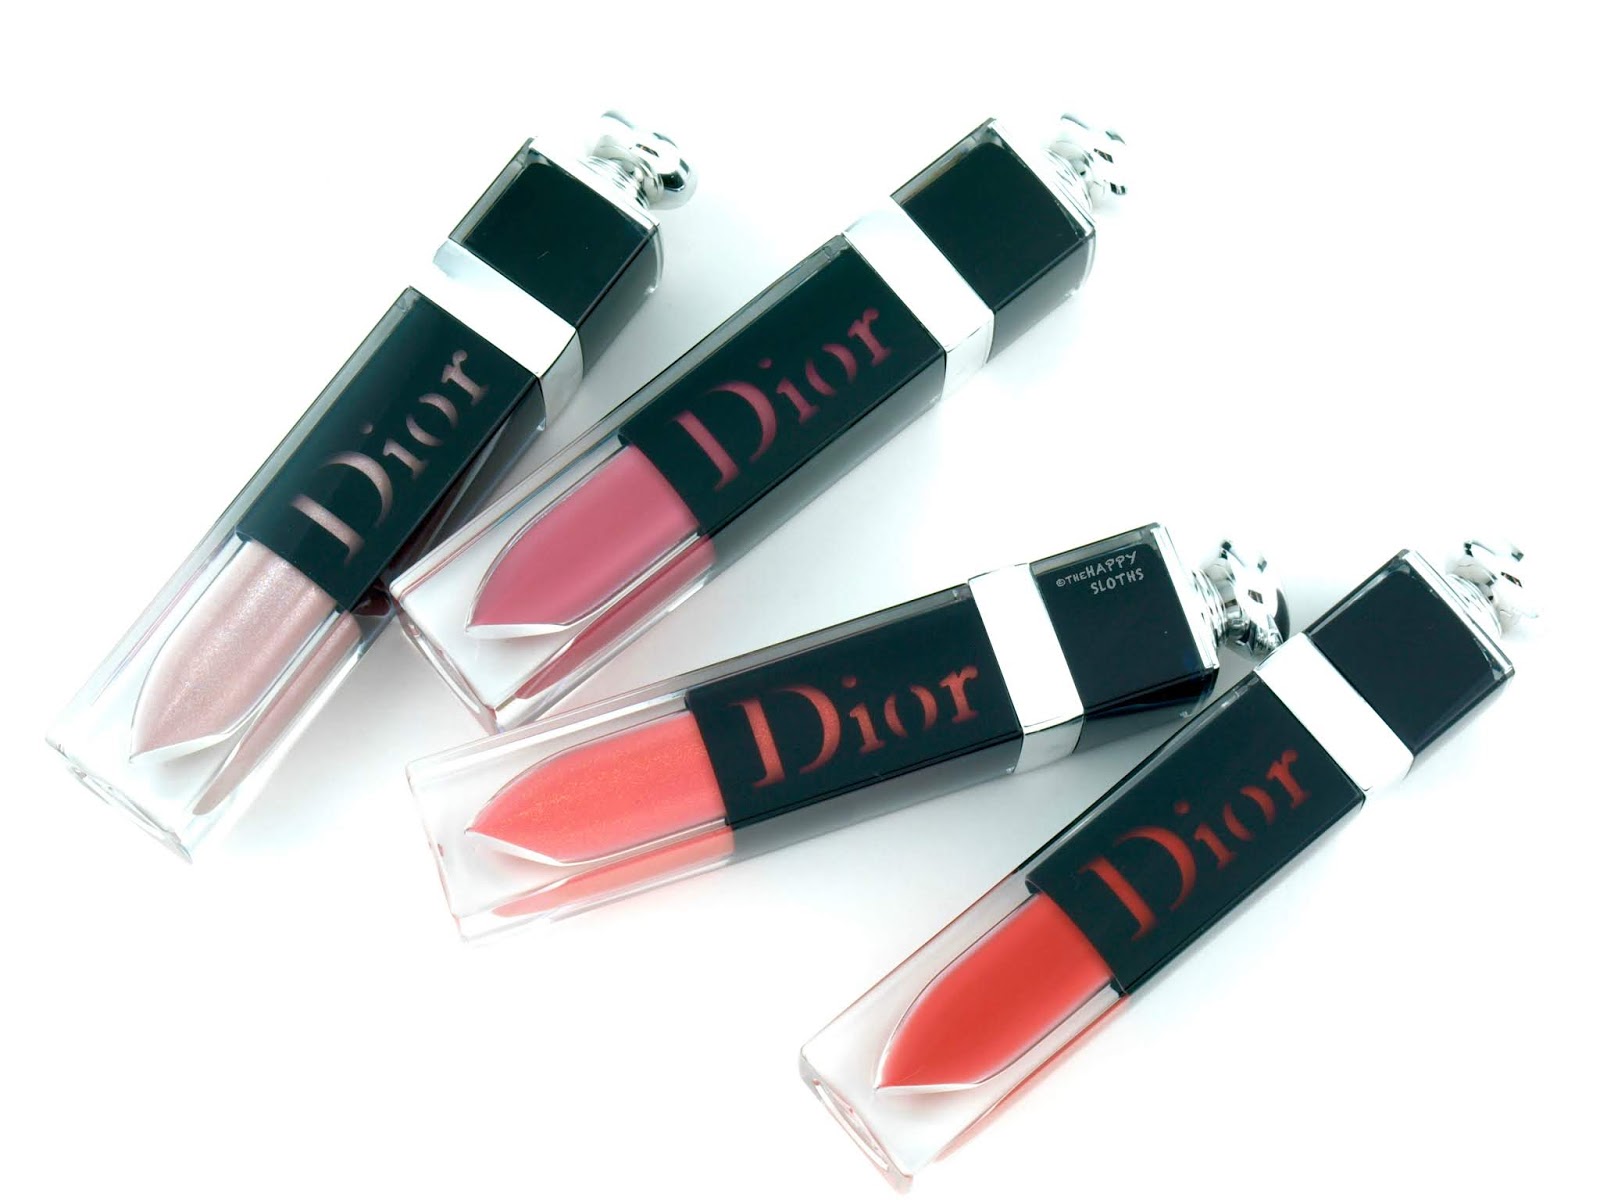 Dior | Dior Addict Lacquer Plump: Review and Swatches